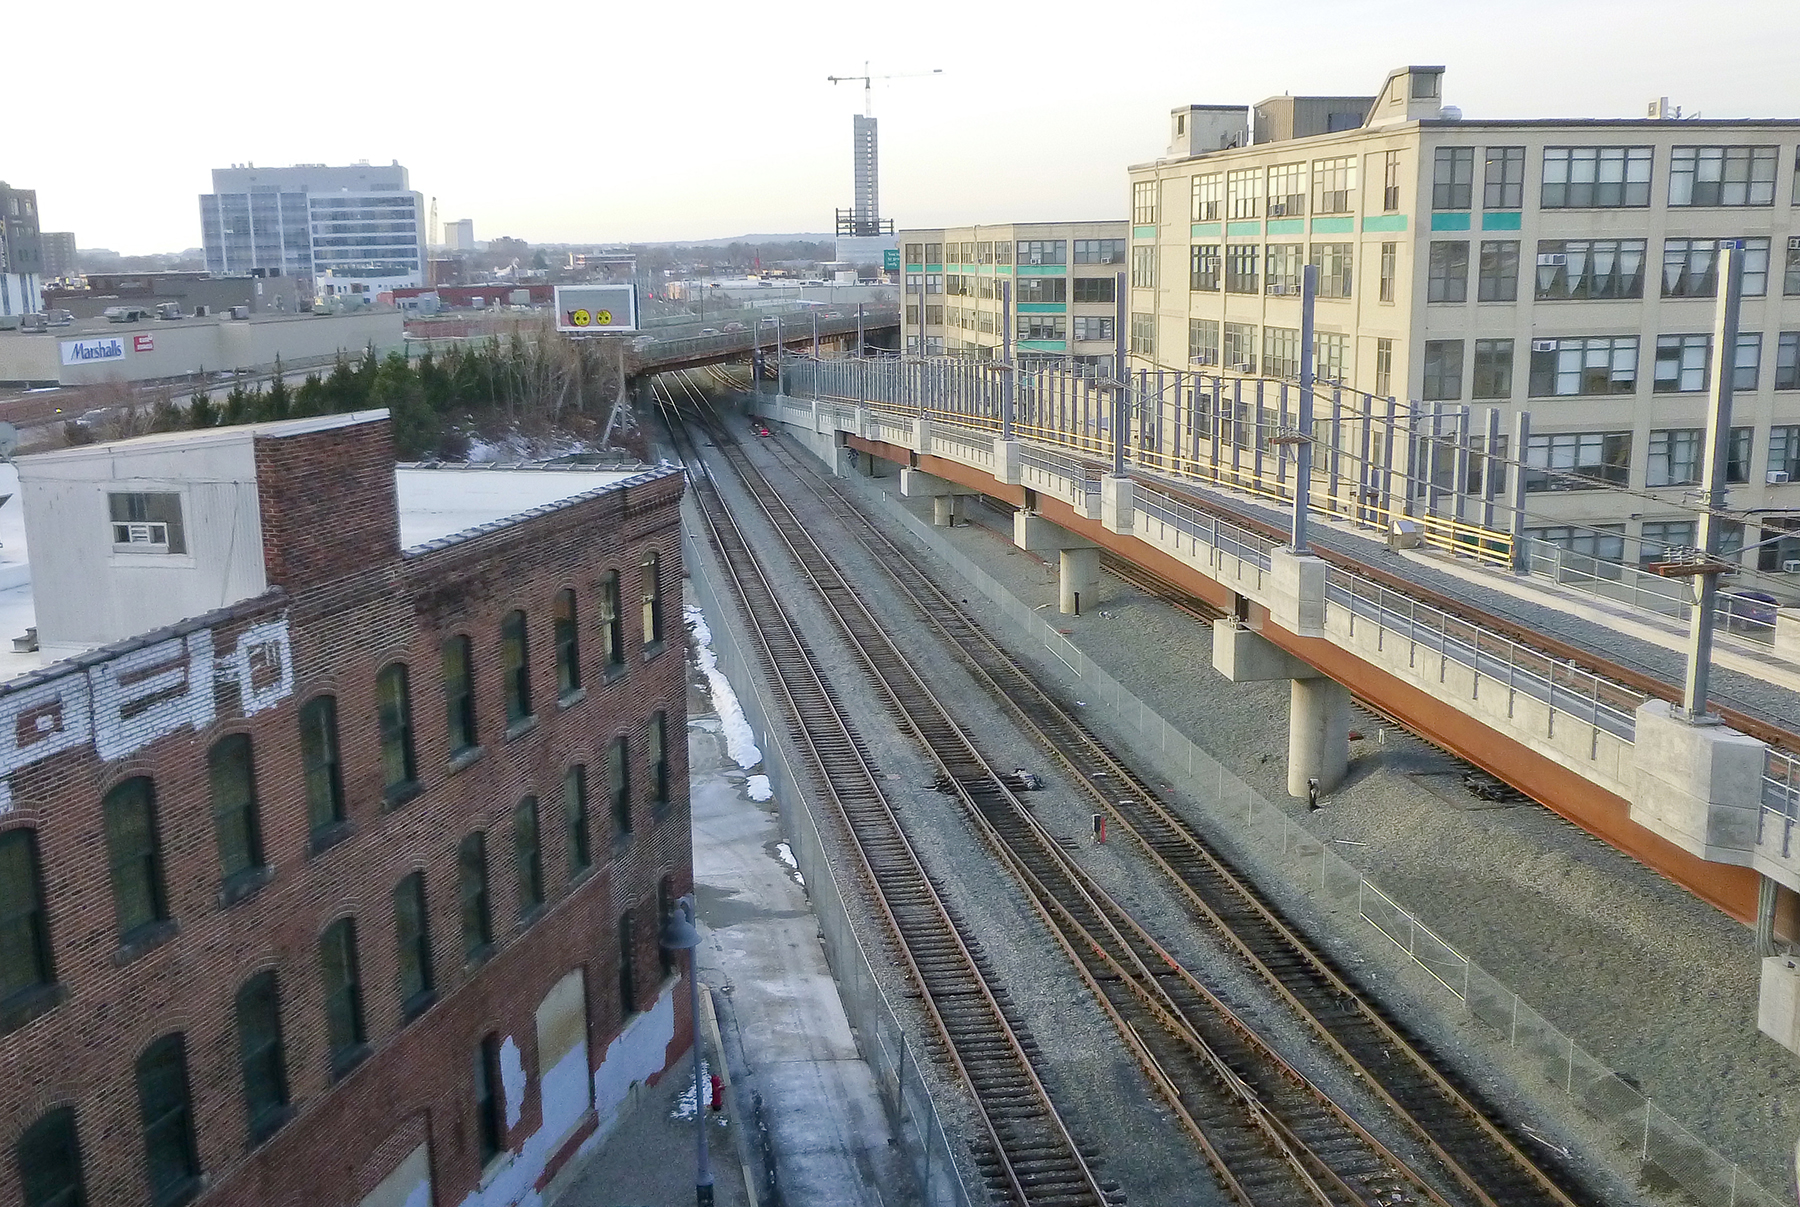 Much of the new Green Line extension is in the right of way of existing commuter rail lines. Here an elevated portion of the westbound Union Square Branch viaduct parallels the Fitchburg Line of the MBTA's commuter rail system. (Image courtesy of GLX Constructors) 